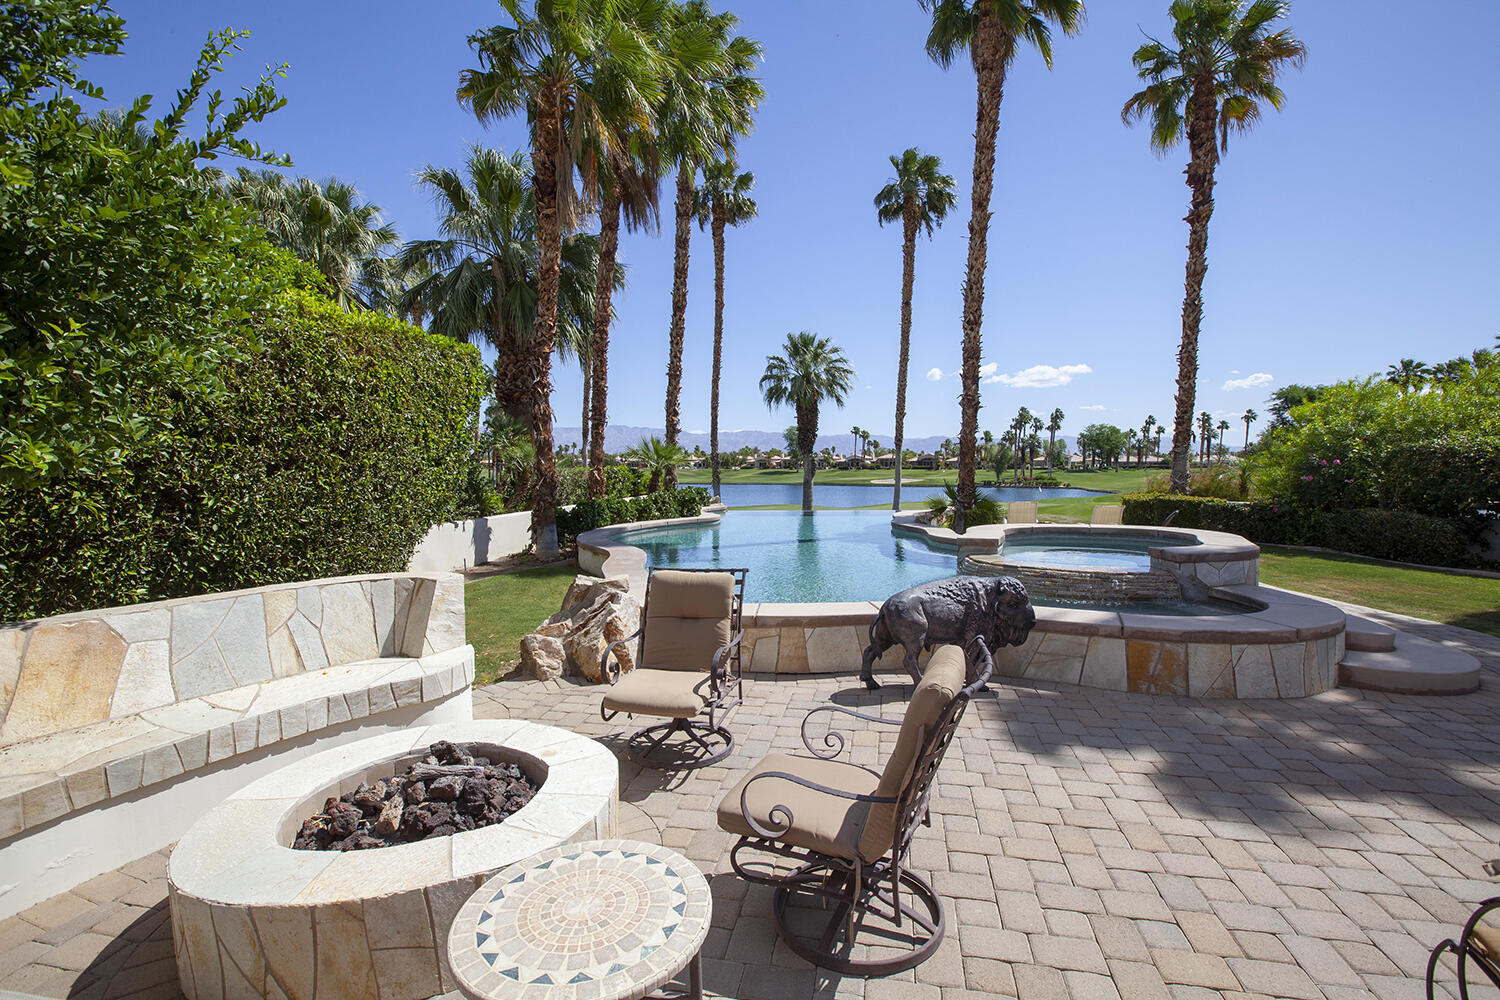 a view of outdoor space with patio furniture and swimming pool